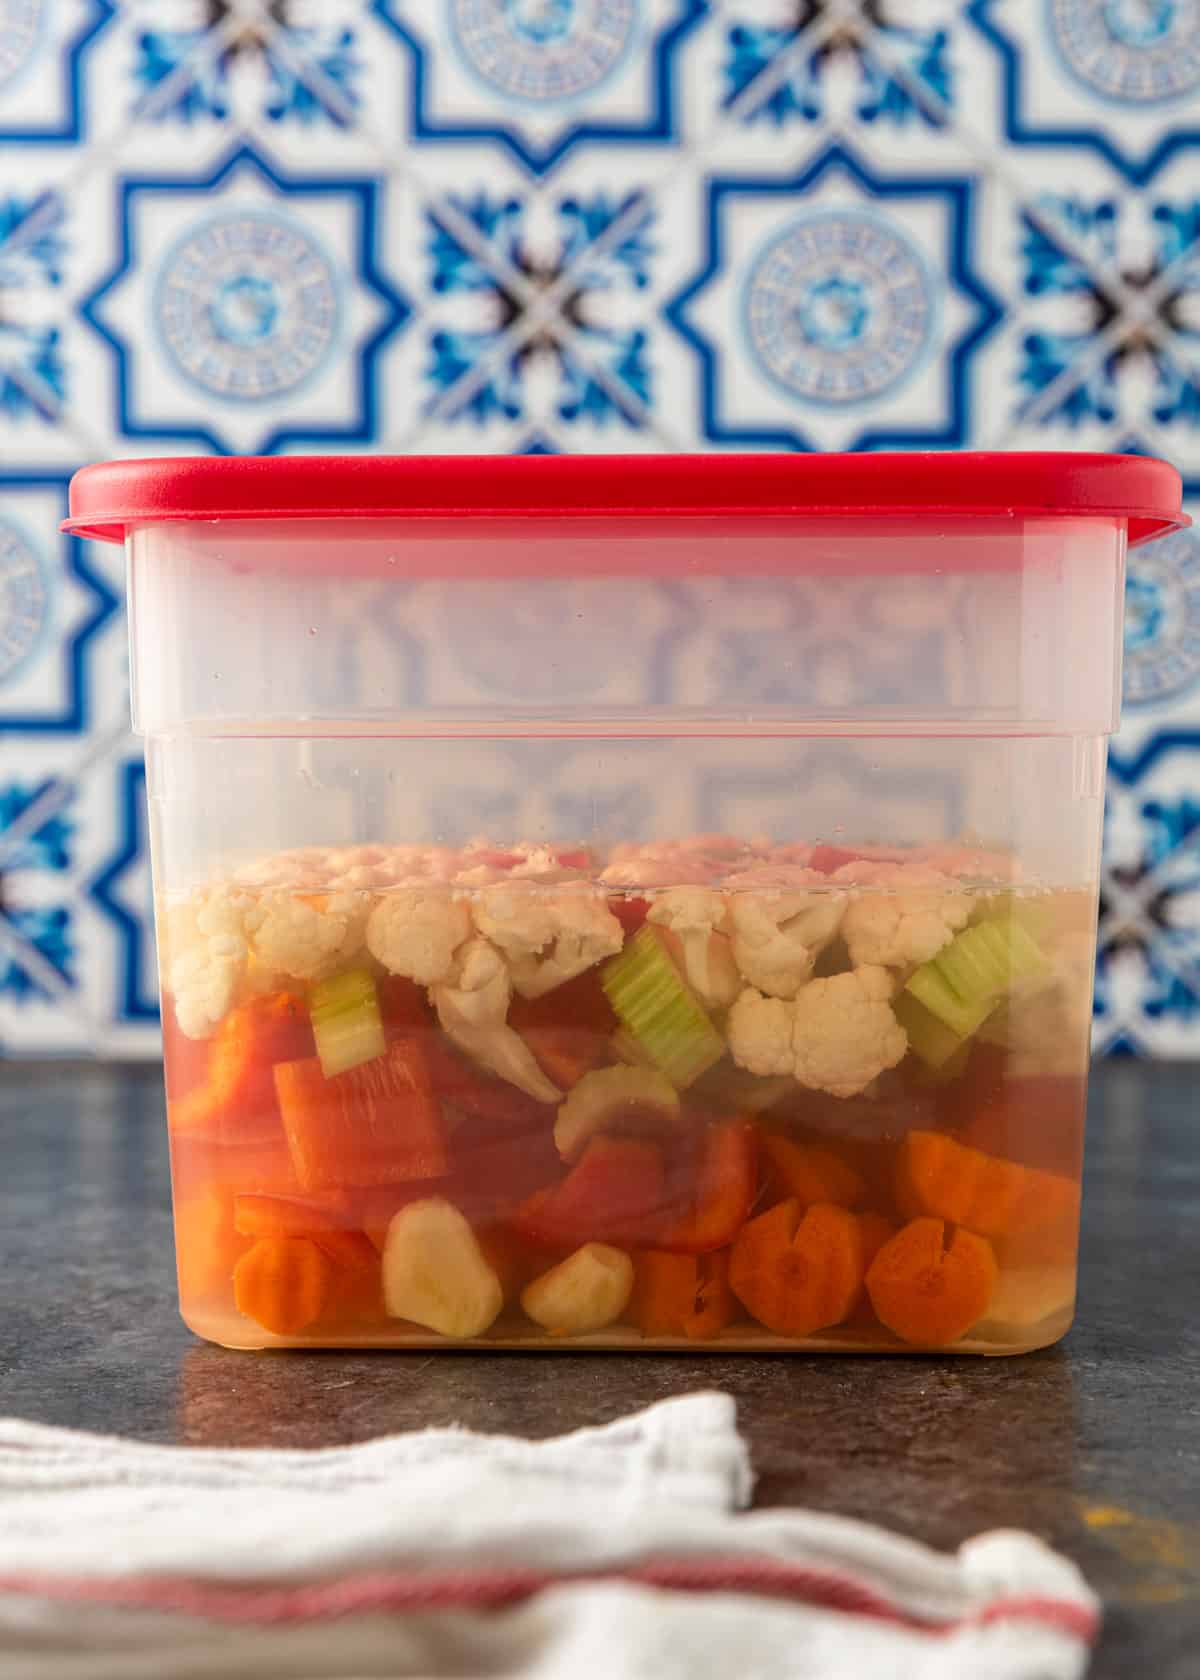 salting the vegetables in salt water in a clear container with a red lid